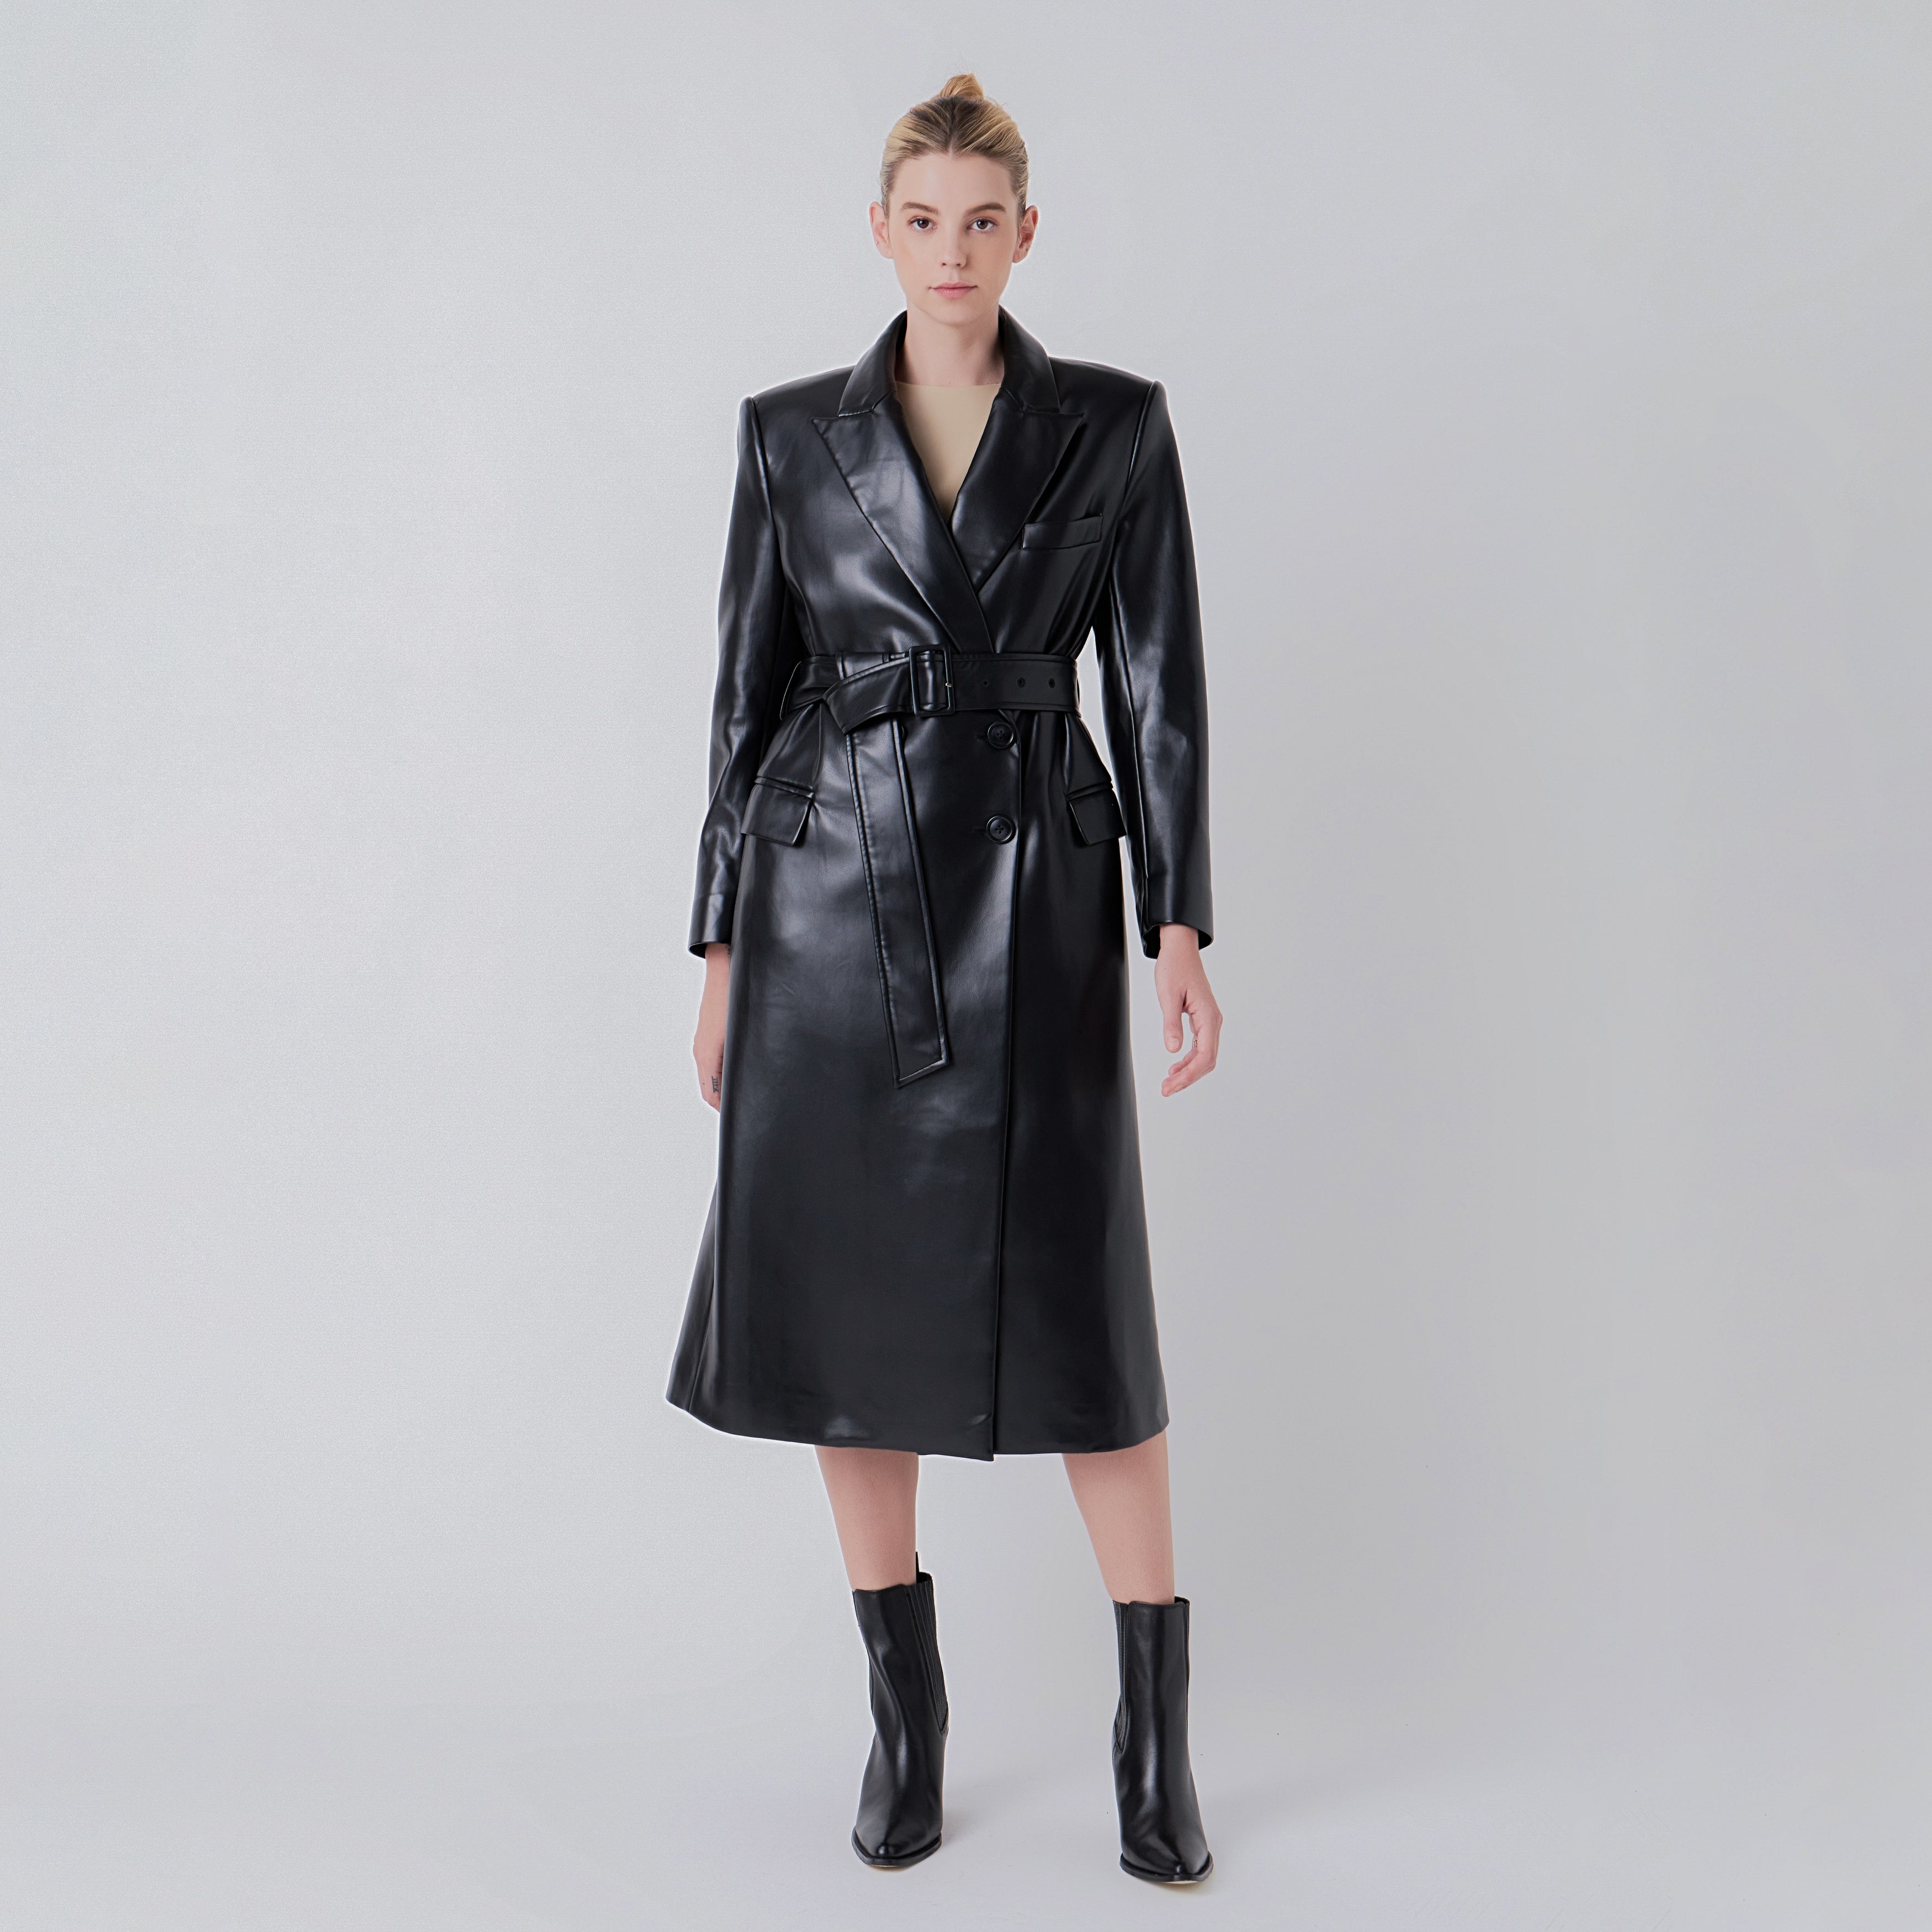 Shop the PU Leather Collection in Women's Clothing from Grey Lab at greylabofficial.com